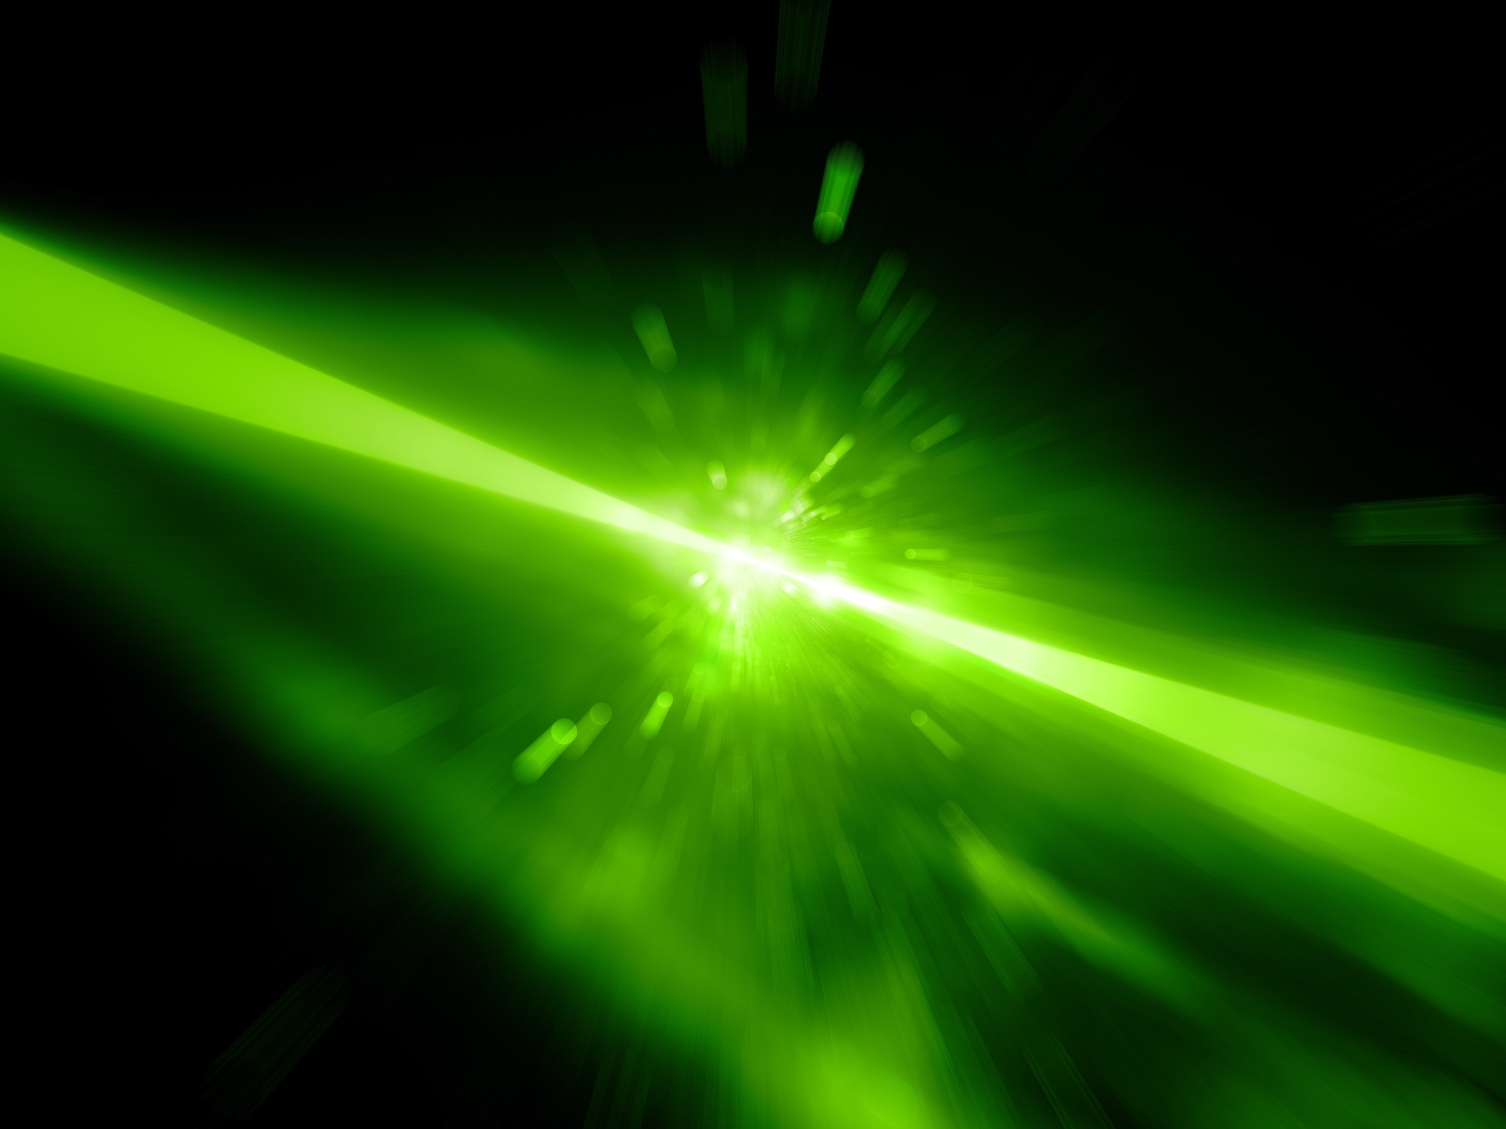 Green laser light - physical area